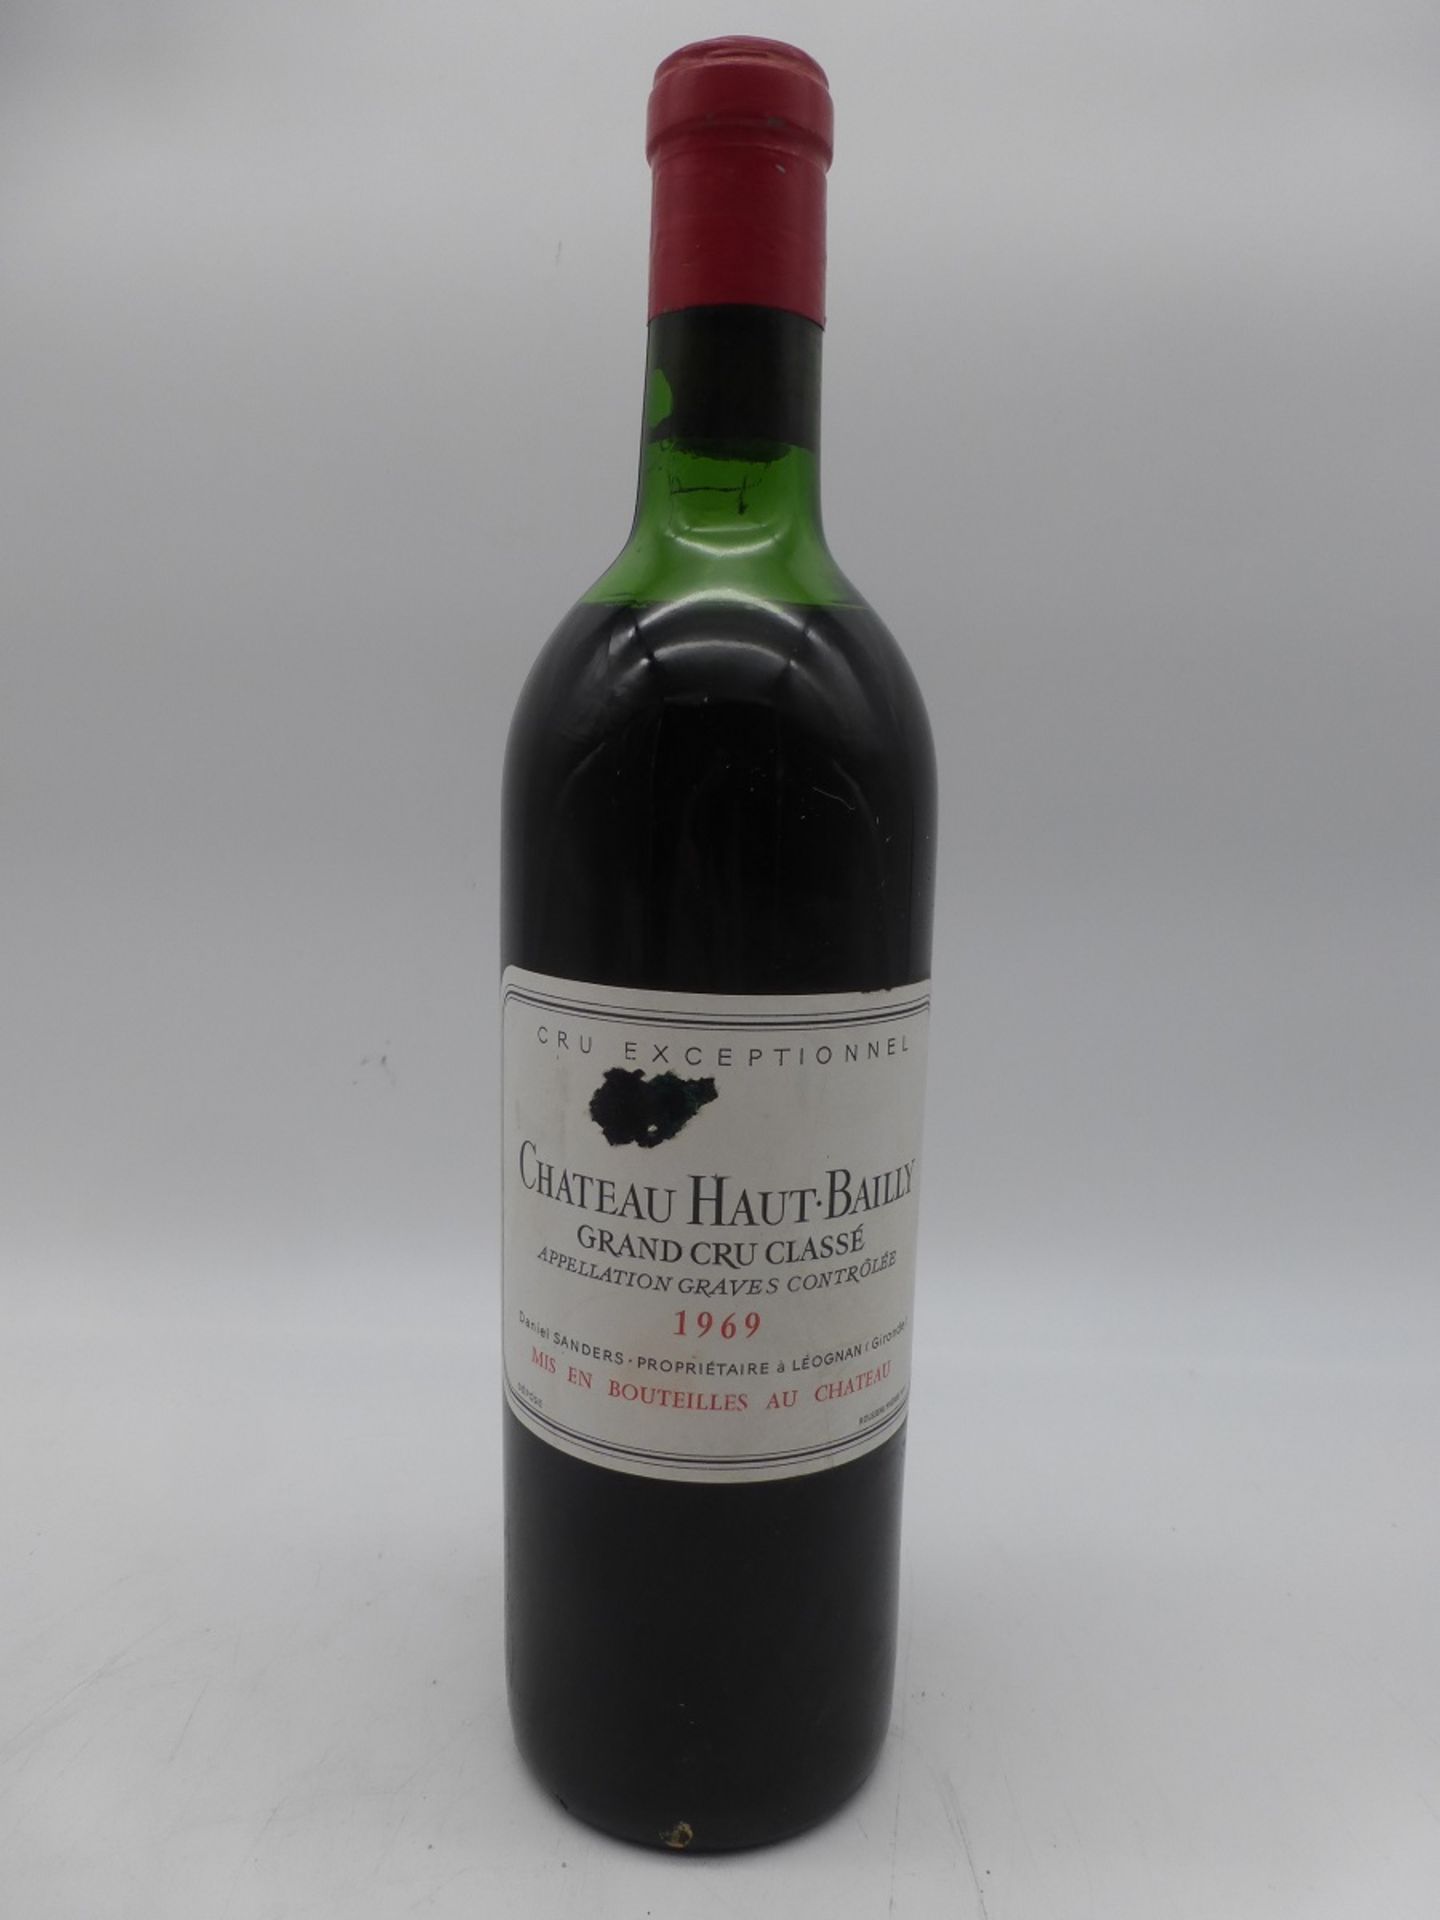 Chateau Haut-Bailly 1969